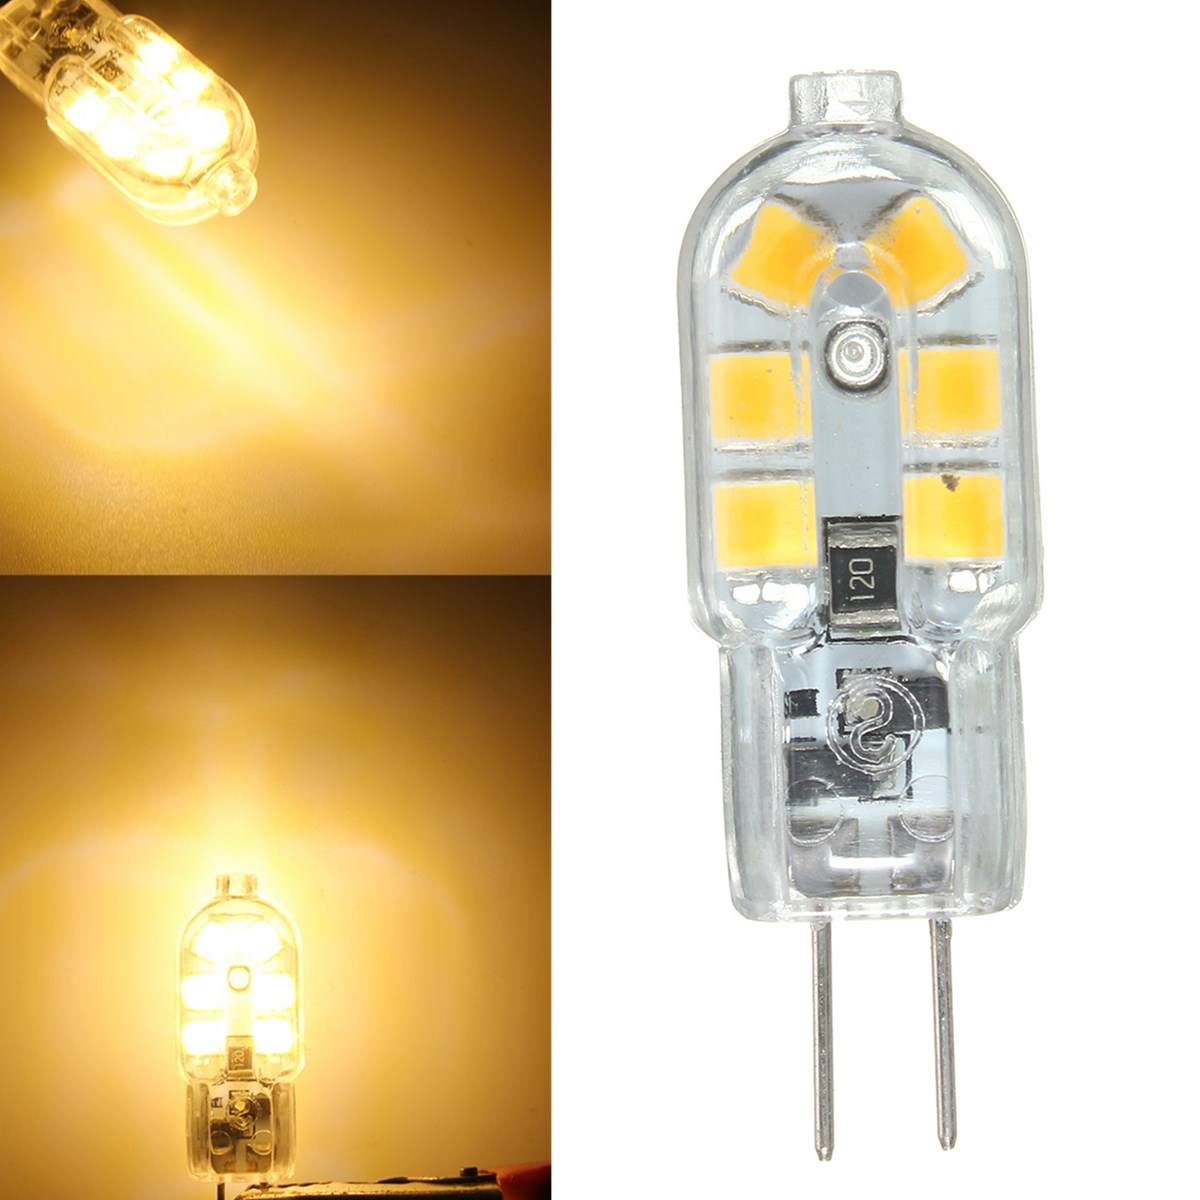 

6PCS DC12V G4 2W Non-dimmable SMD2835 Warm White Transparent LED Light Bulb for Indoor Home Decor